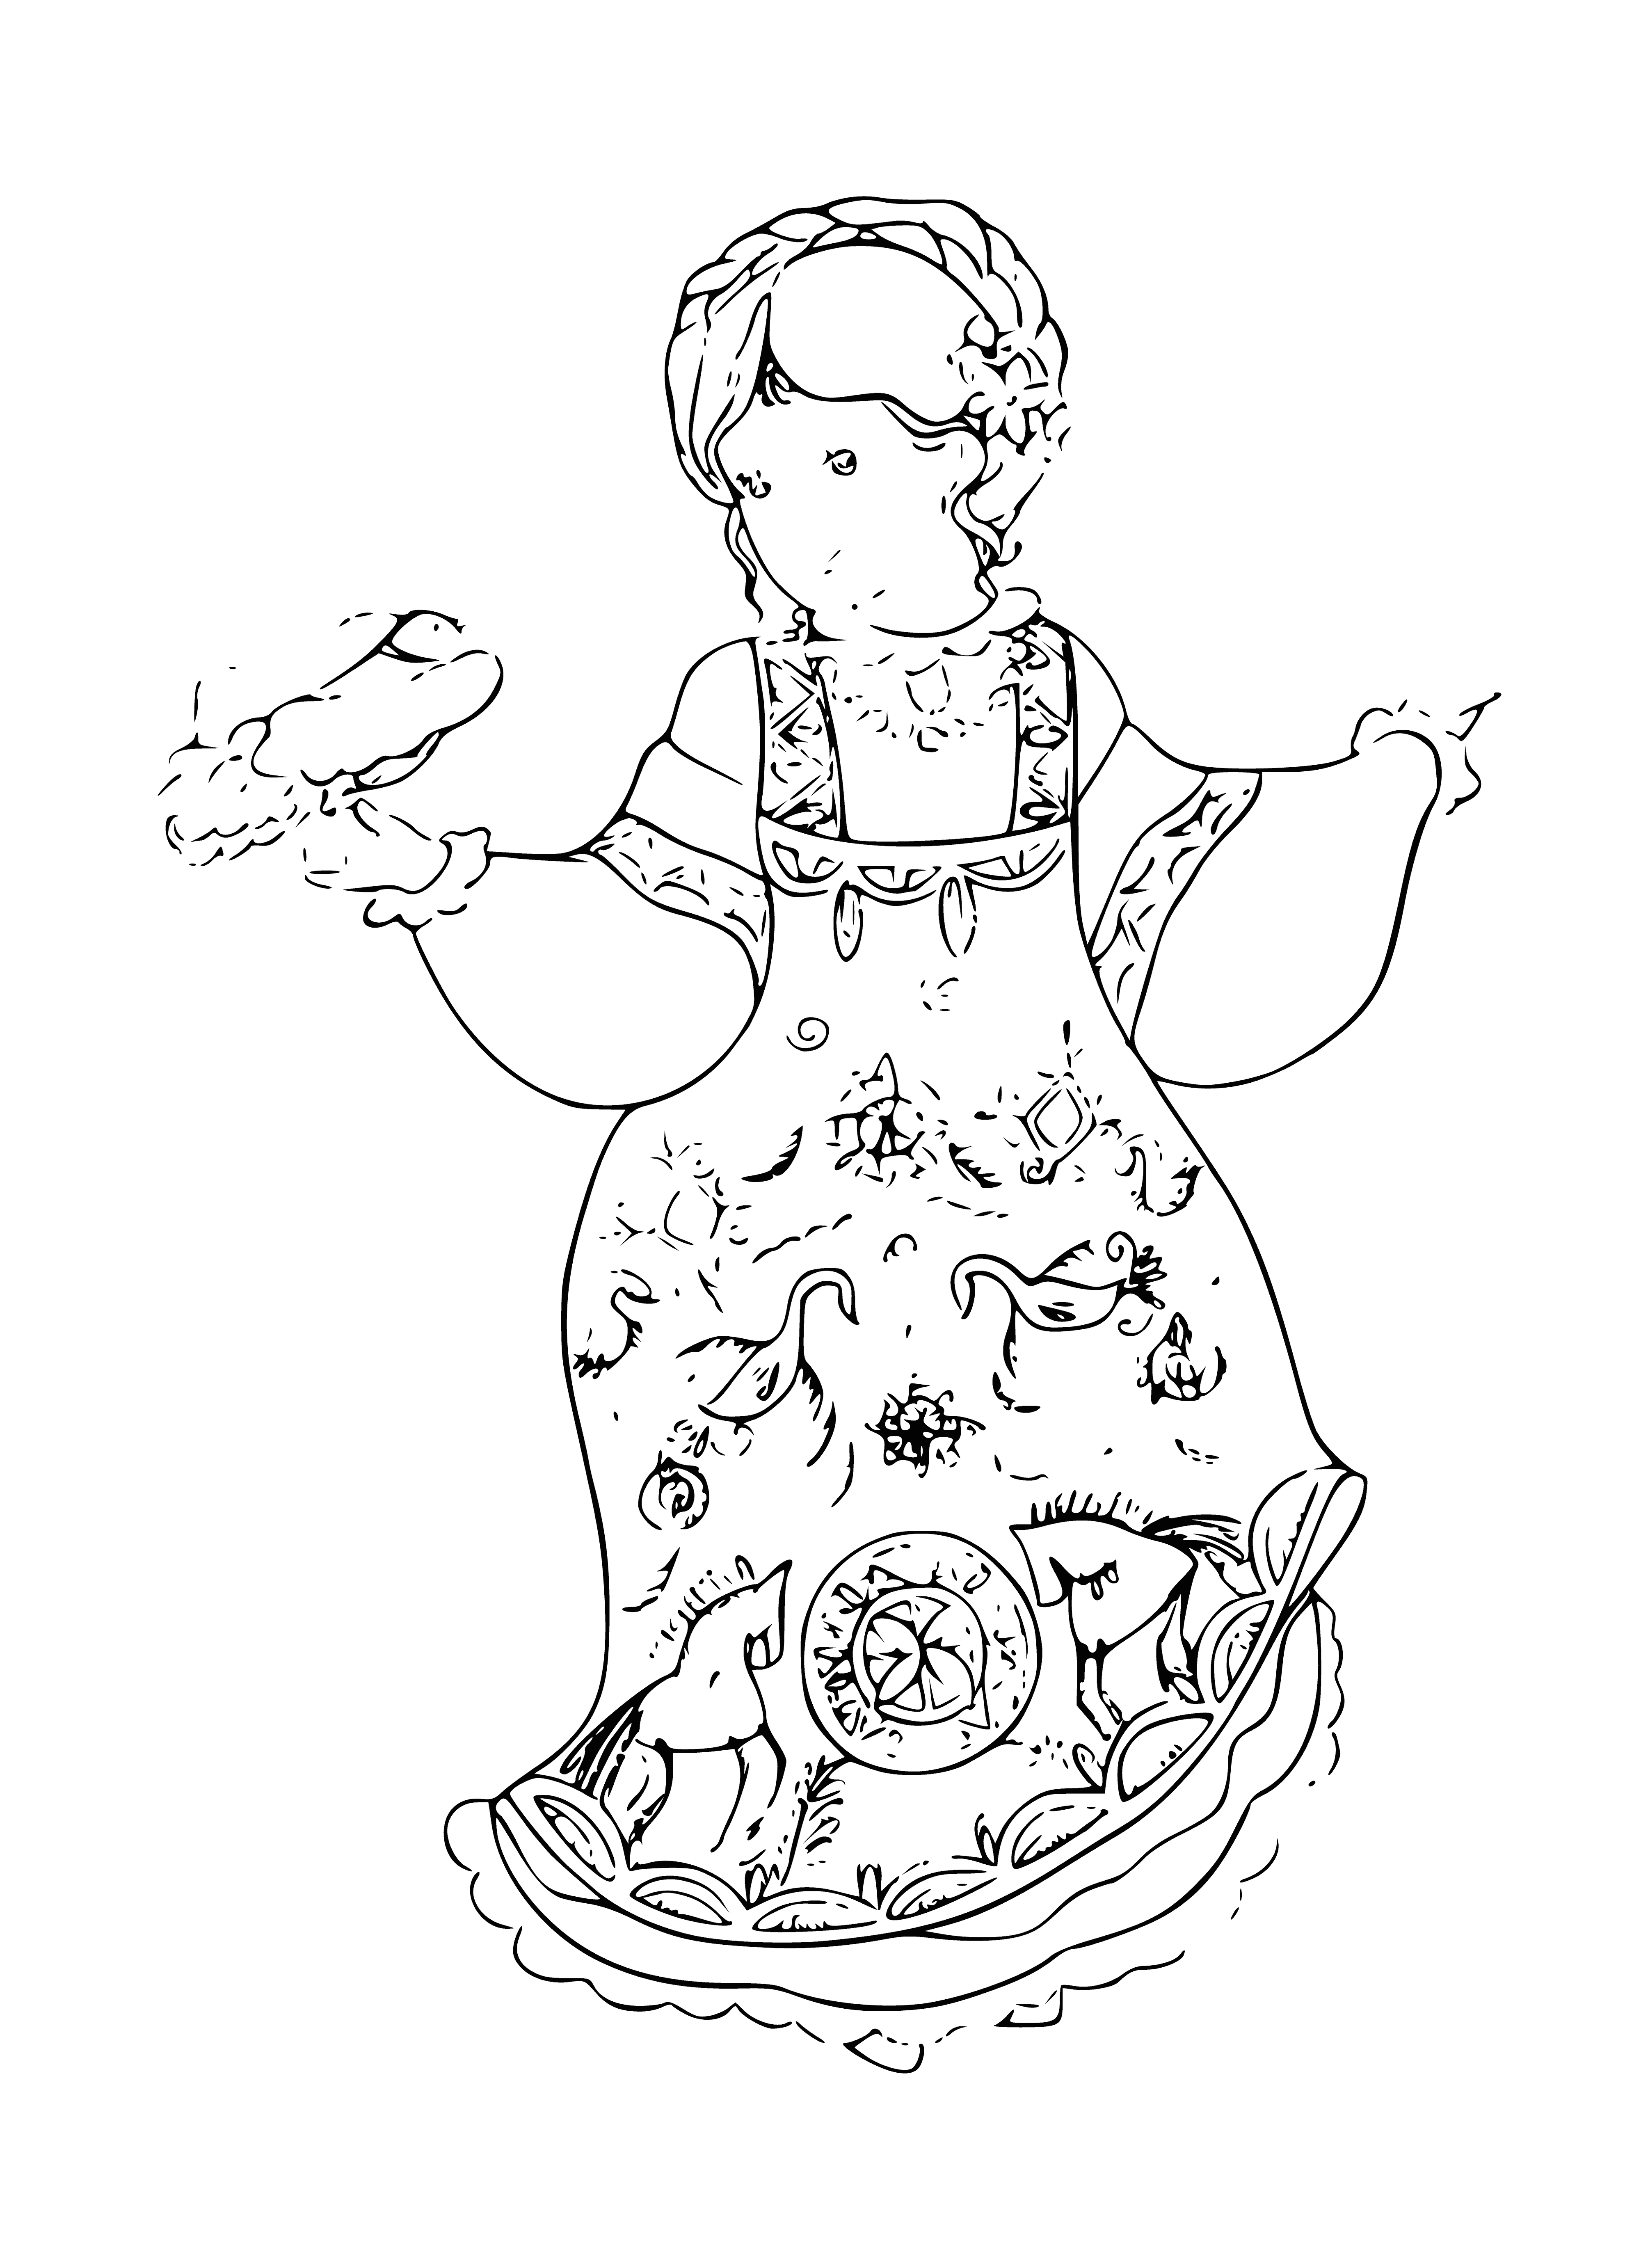 coloring page: A woman stands in a field in traditional dress, hands clasped behind her head, wearing a white headscarf. A peaceful scene.